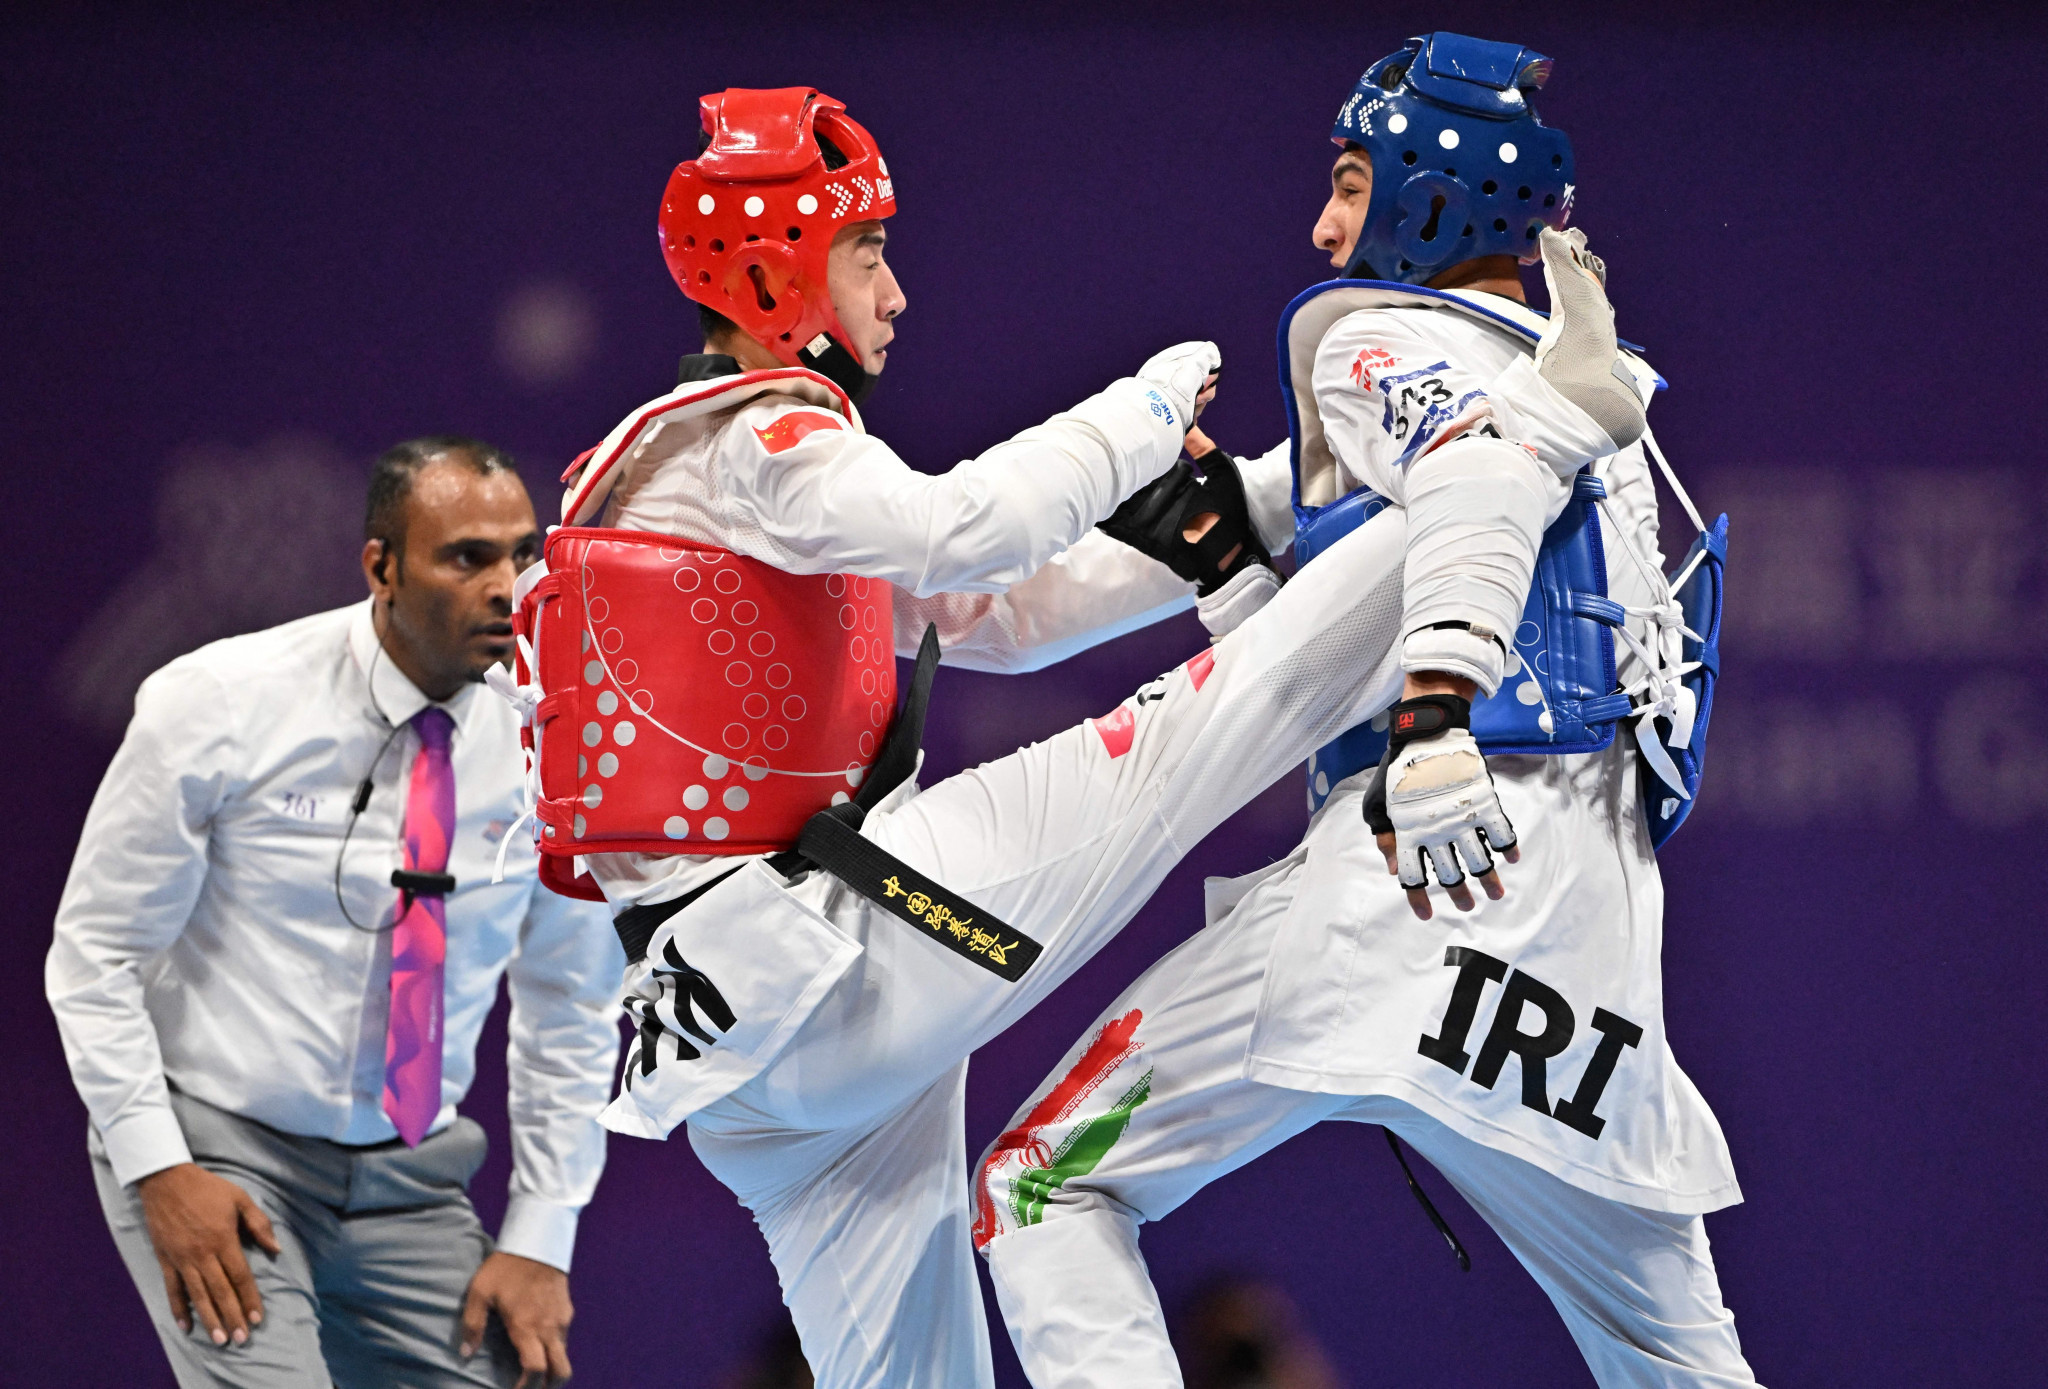 Stars to watch at the Taekwondo Asian Qualifiers. GETTY IMAGES